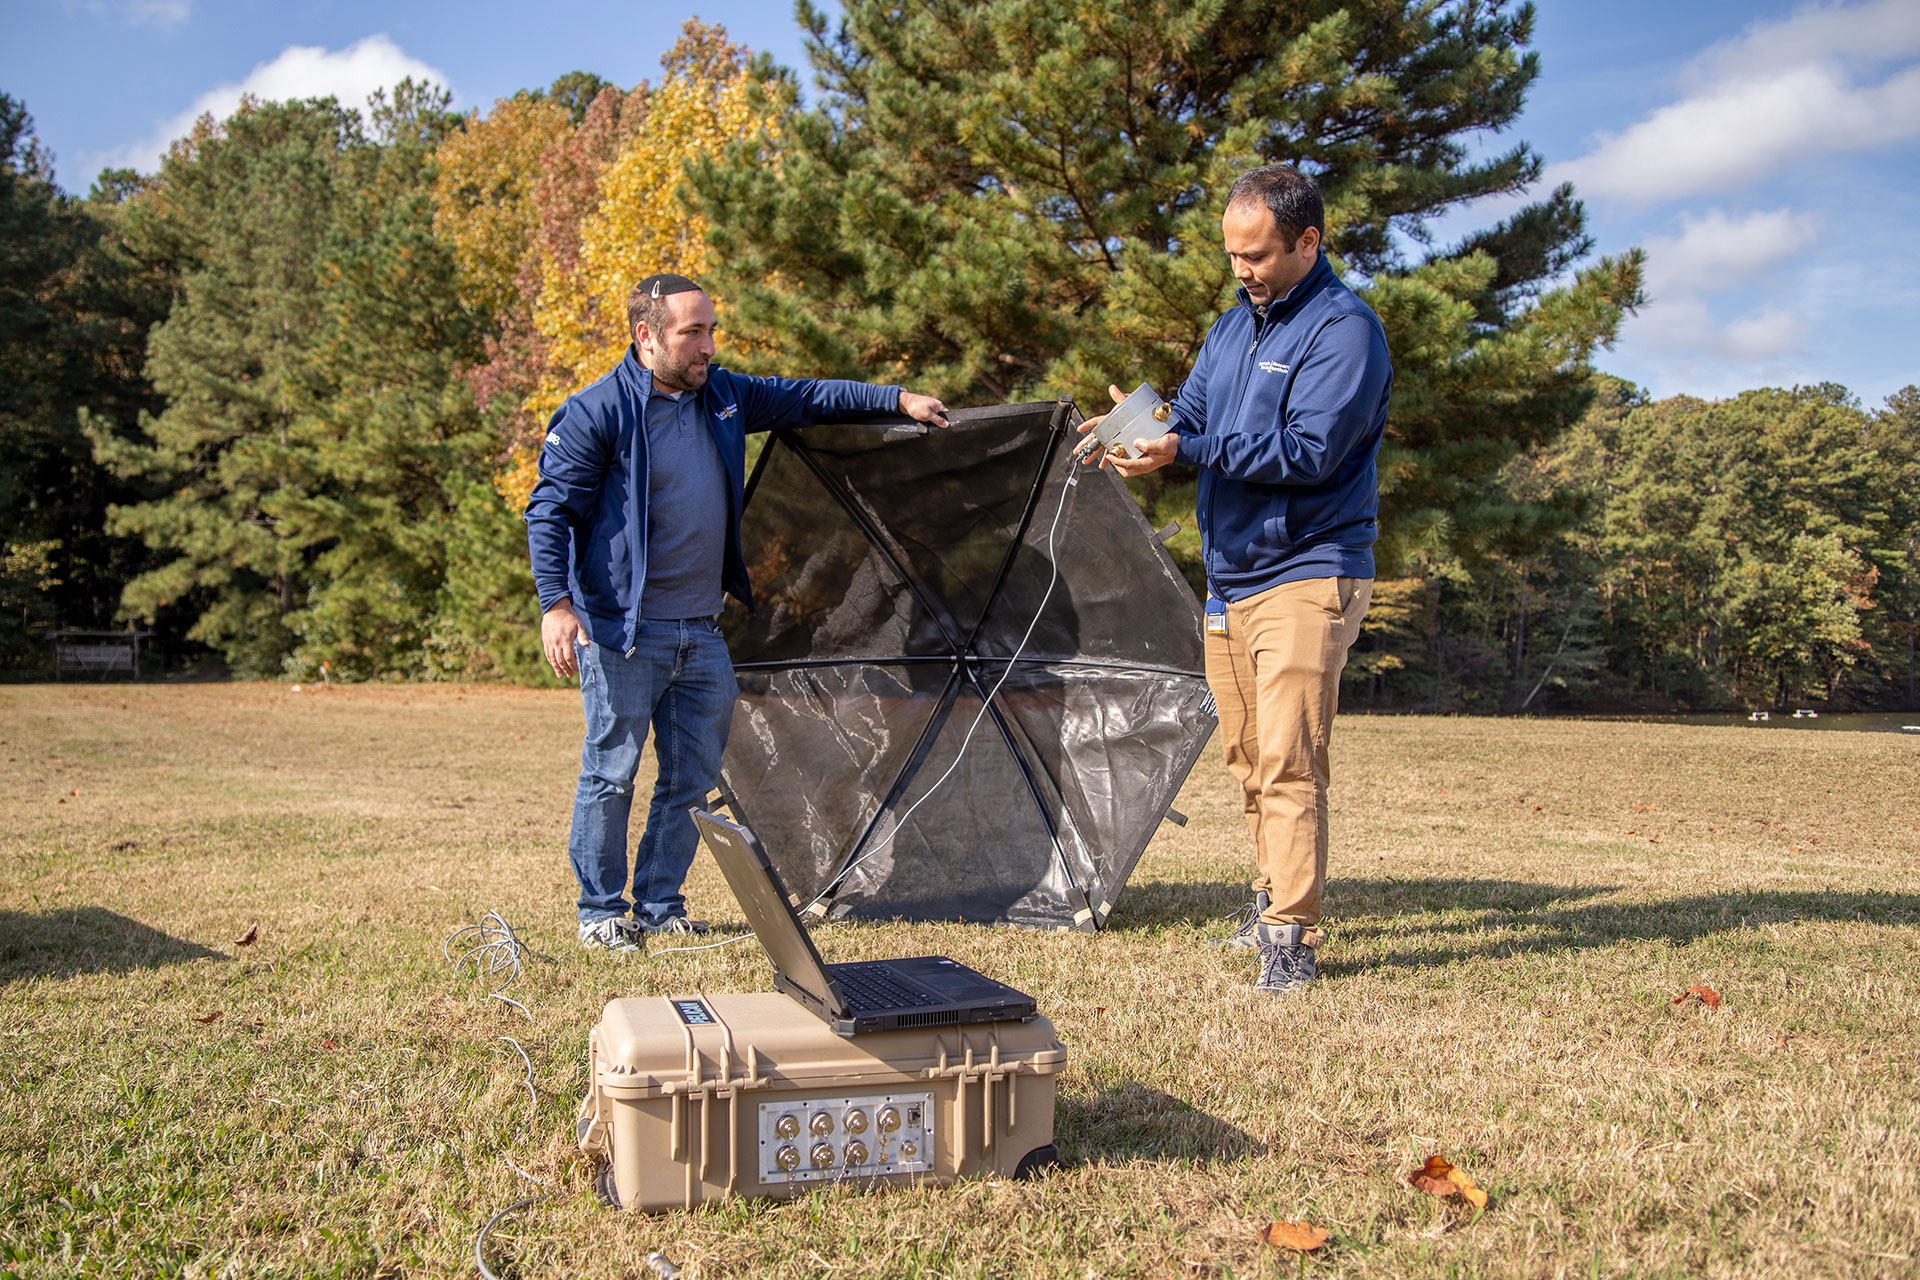 Two researchers outdoors assembling an umbrella like device.